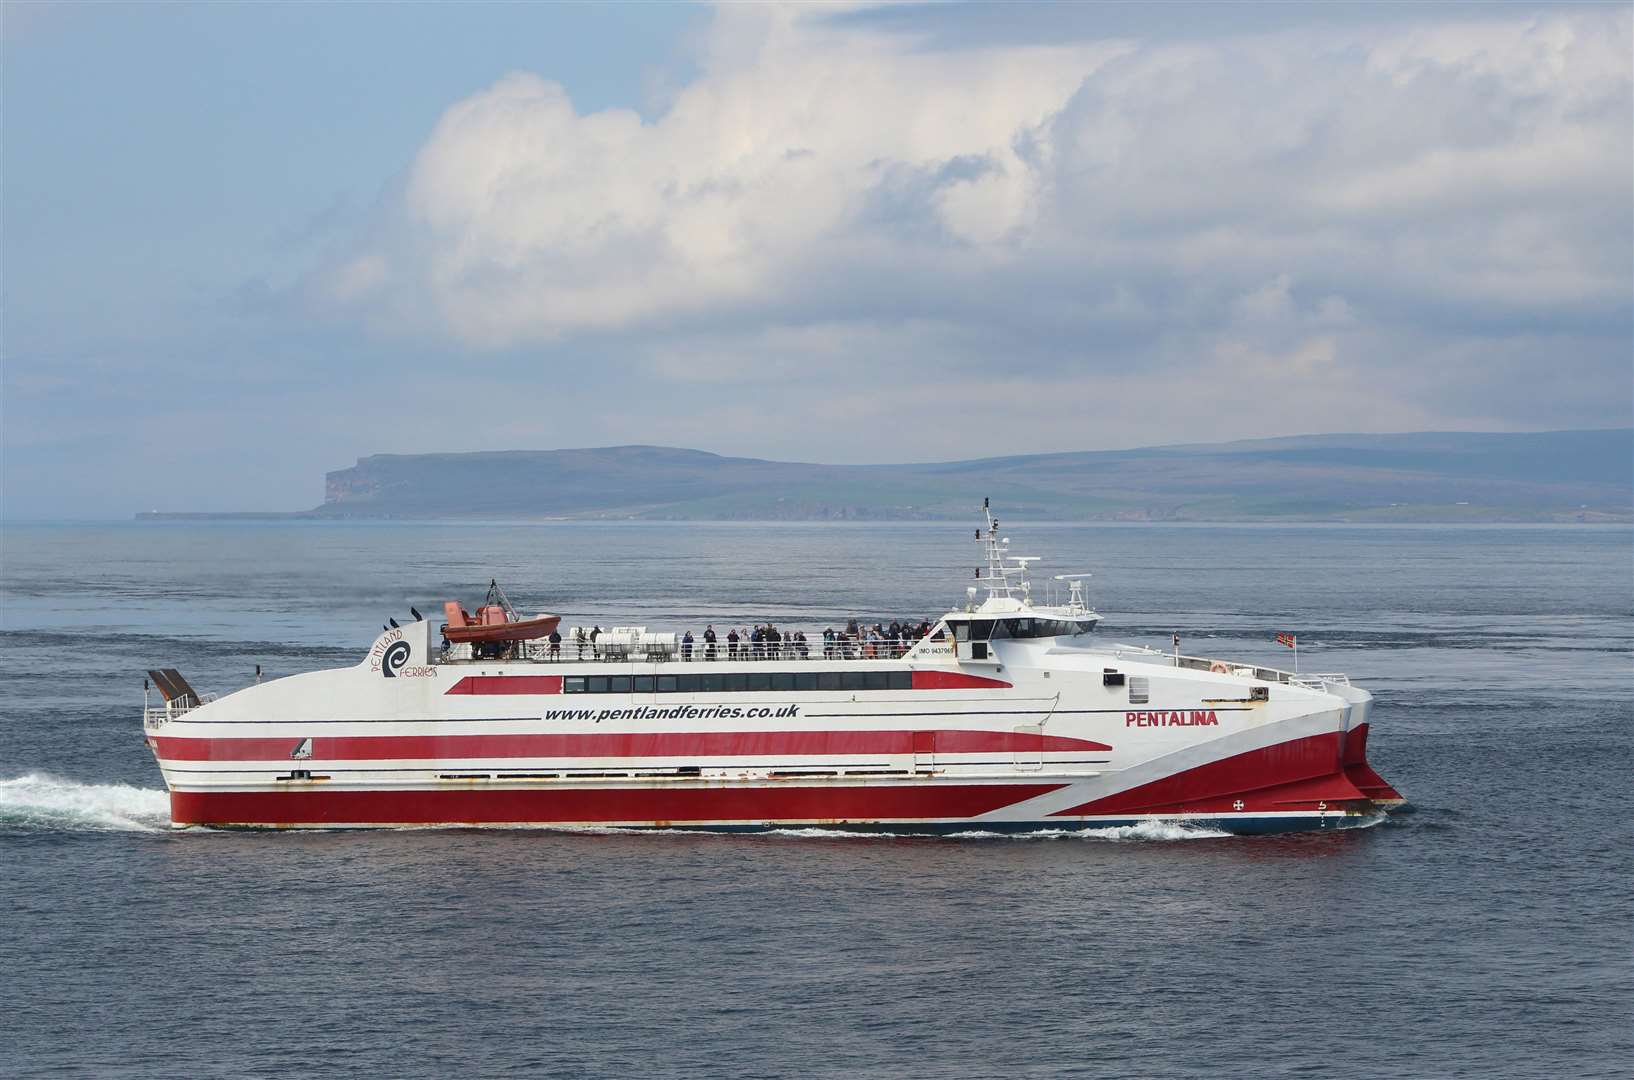 The Pentalina will be back on the St Margaret’s Hope to Gills Bay route from Tuesday. Picture: Alan Hendry